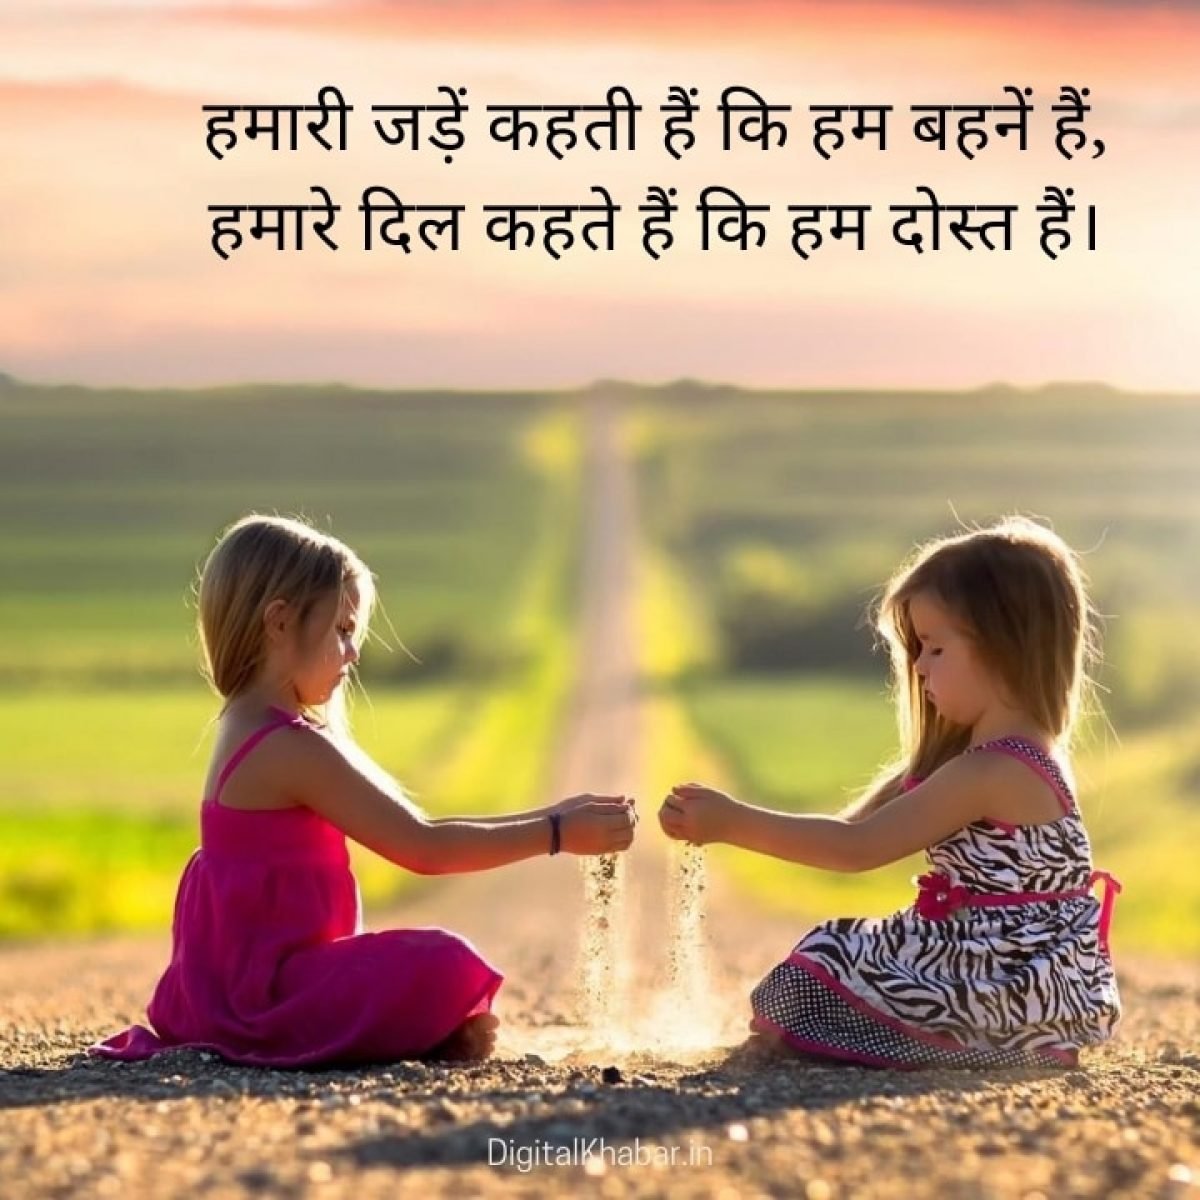 Top 999+ hindi quotes images – Amazing Collection hindi quotes images ...